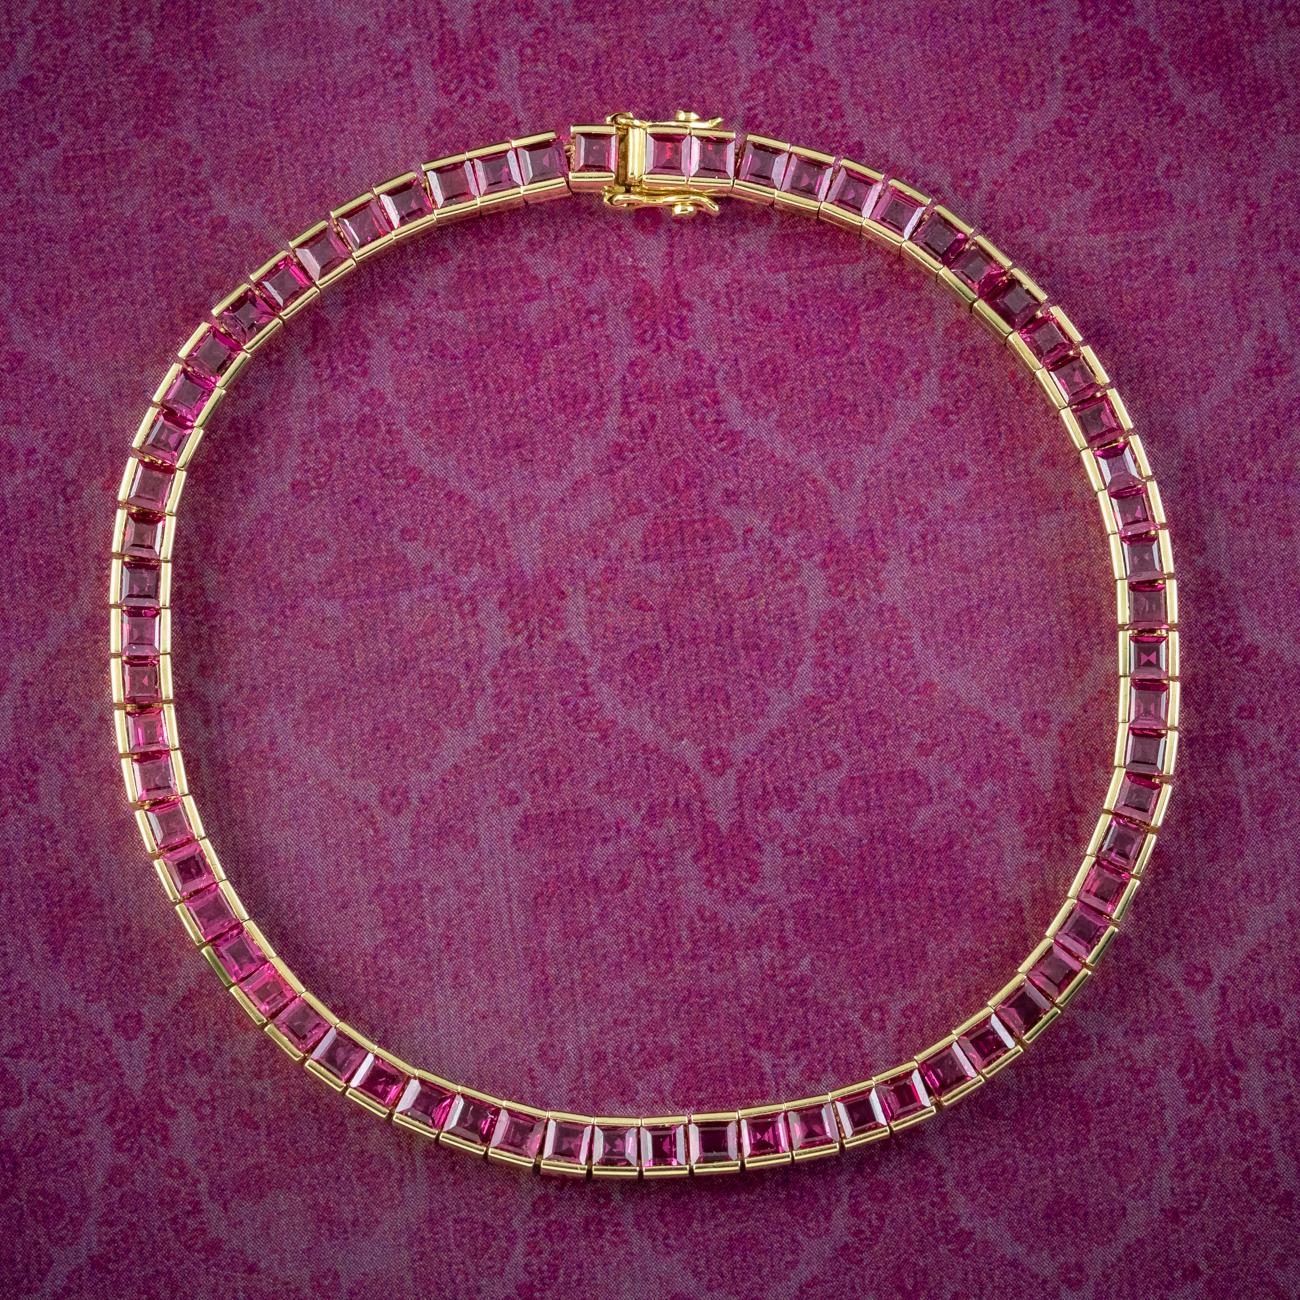 A glamorous Art Deco inspired tennis bracelet showcasing sixty-five square cut rubies with a deep cherry-pink hue. Each is tension set in an 18ct gold setting and weigh approx. 0.10ct each, making a grand total of approx. 6.5ct. Made Circa